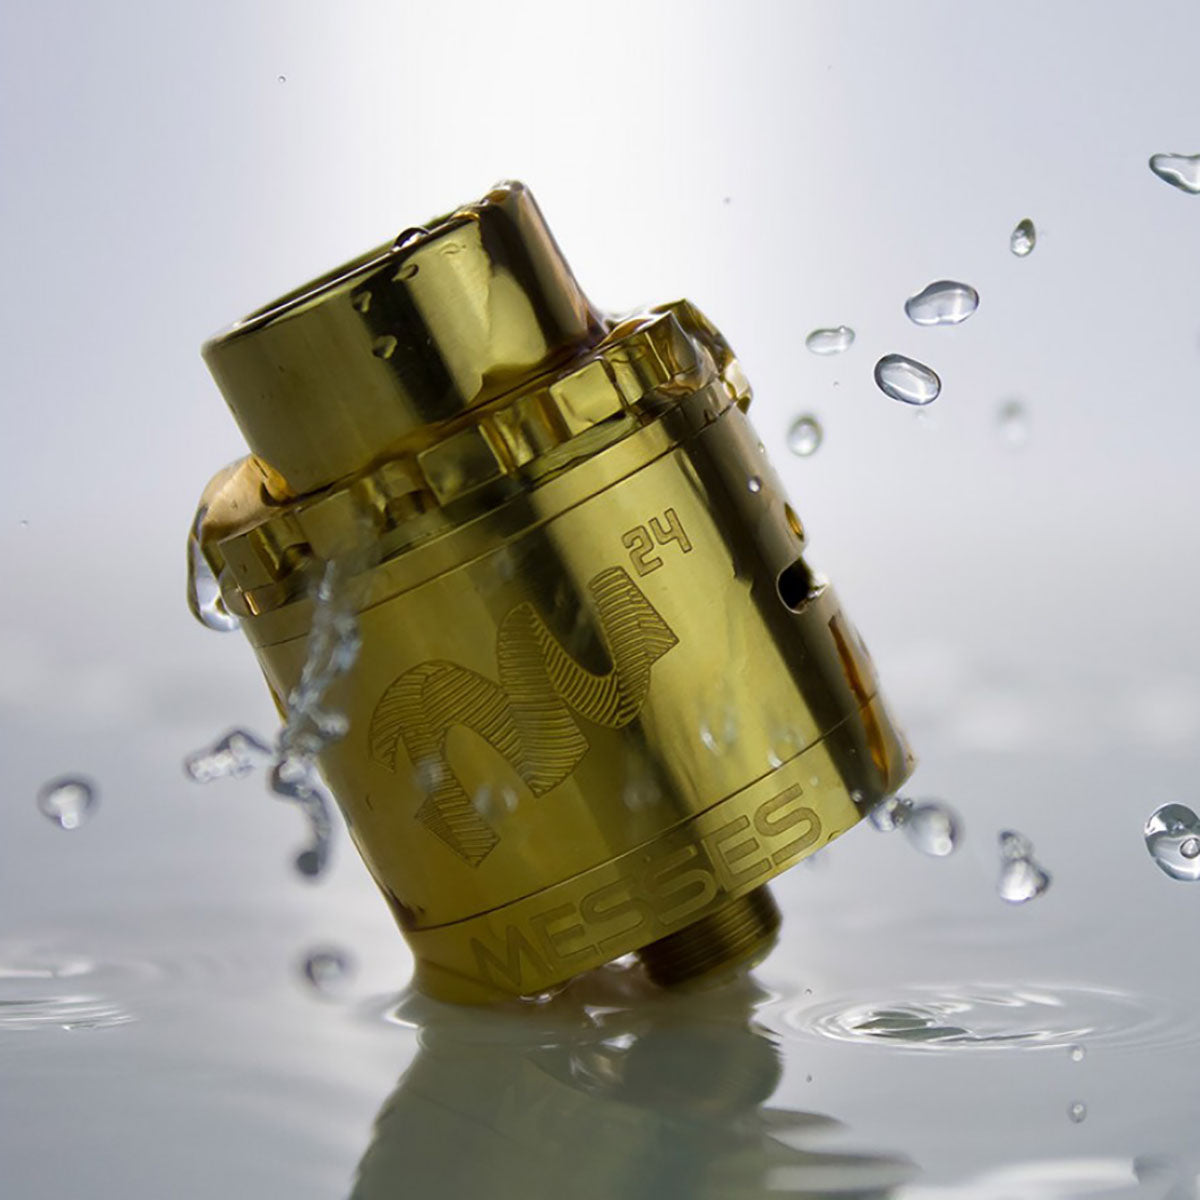 TM24 Pro Gold RDA by Twisted Messes